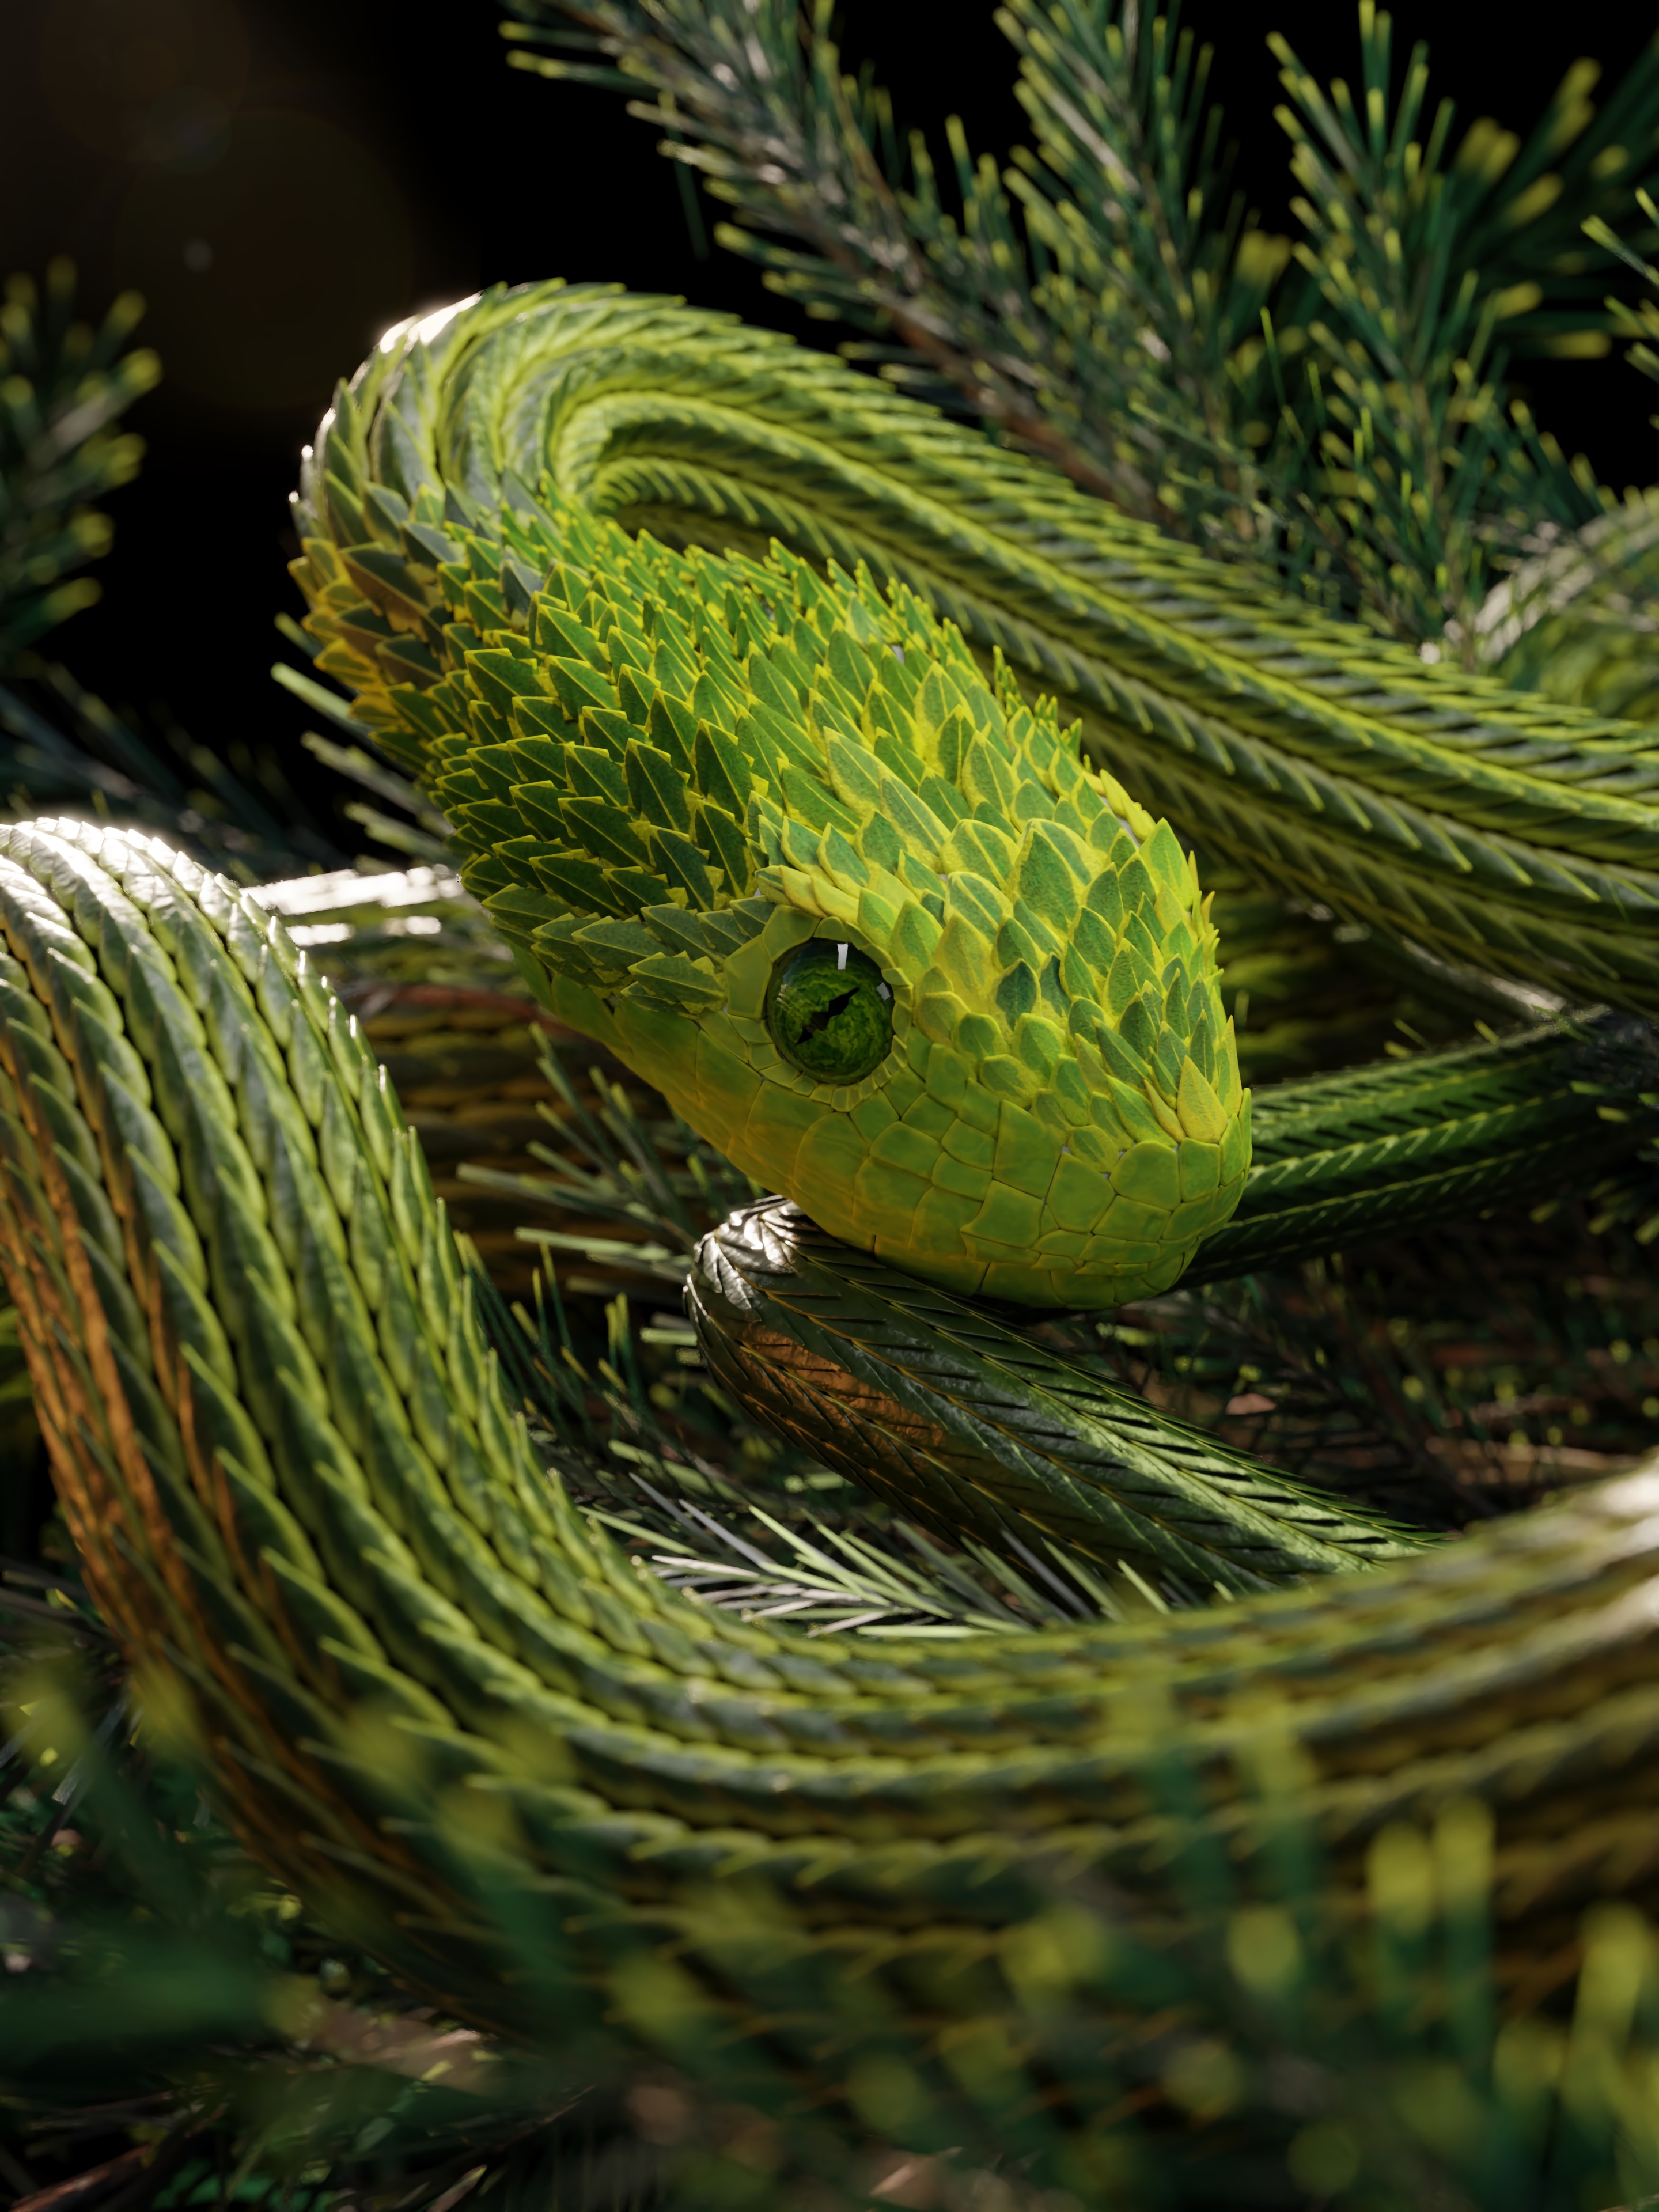 HD wallpaper 3d, snake, green, reptile, scales, scale